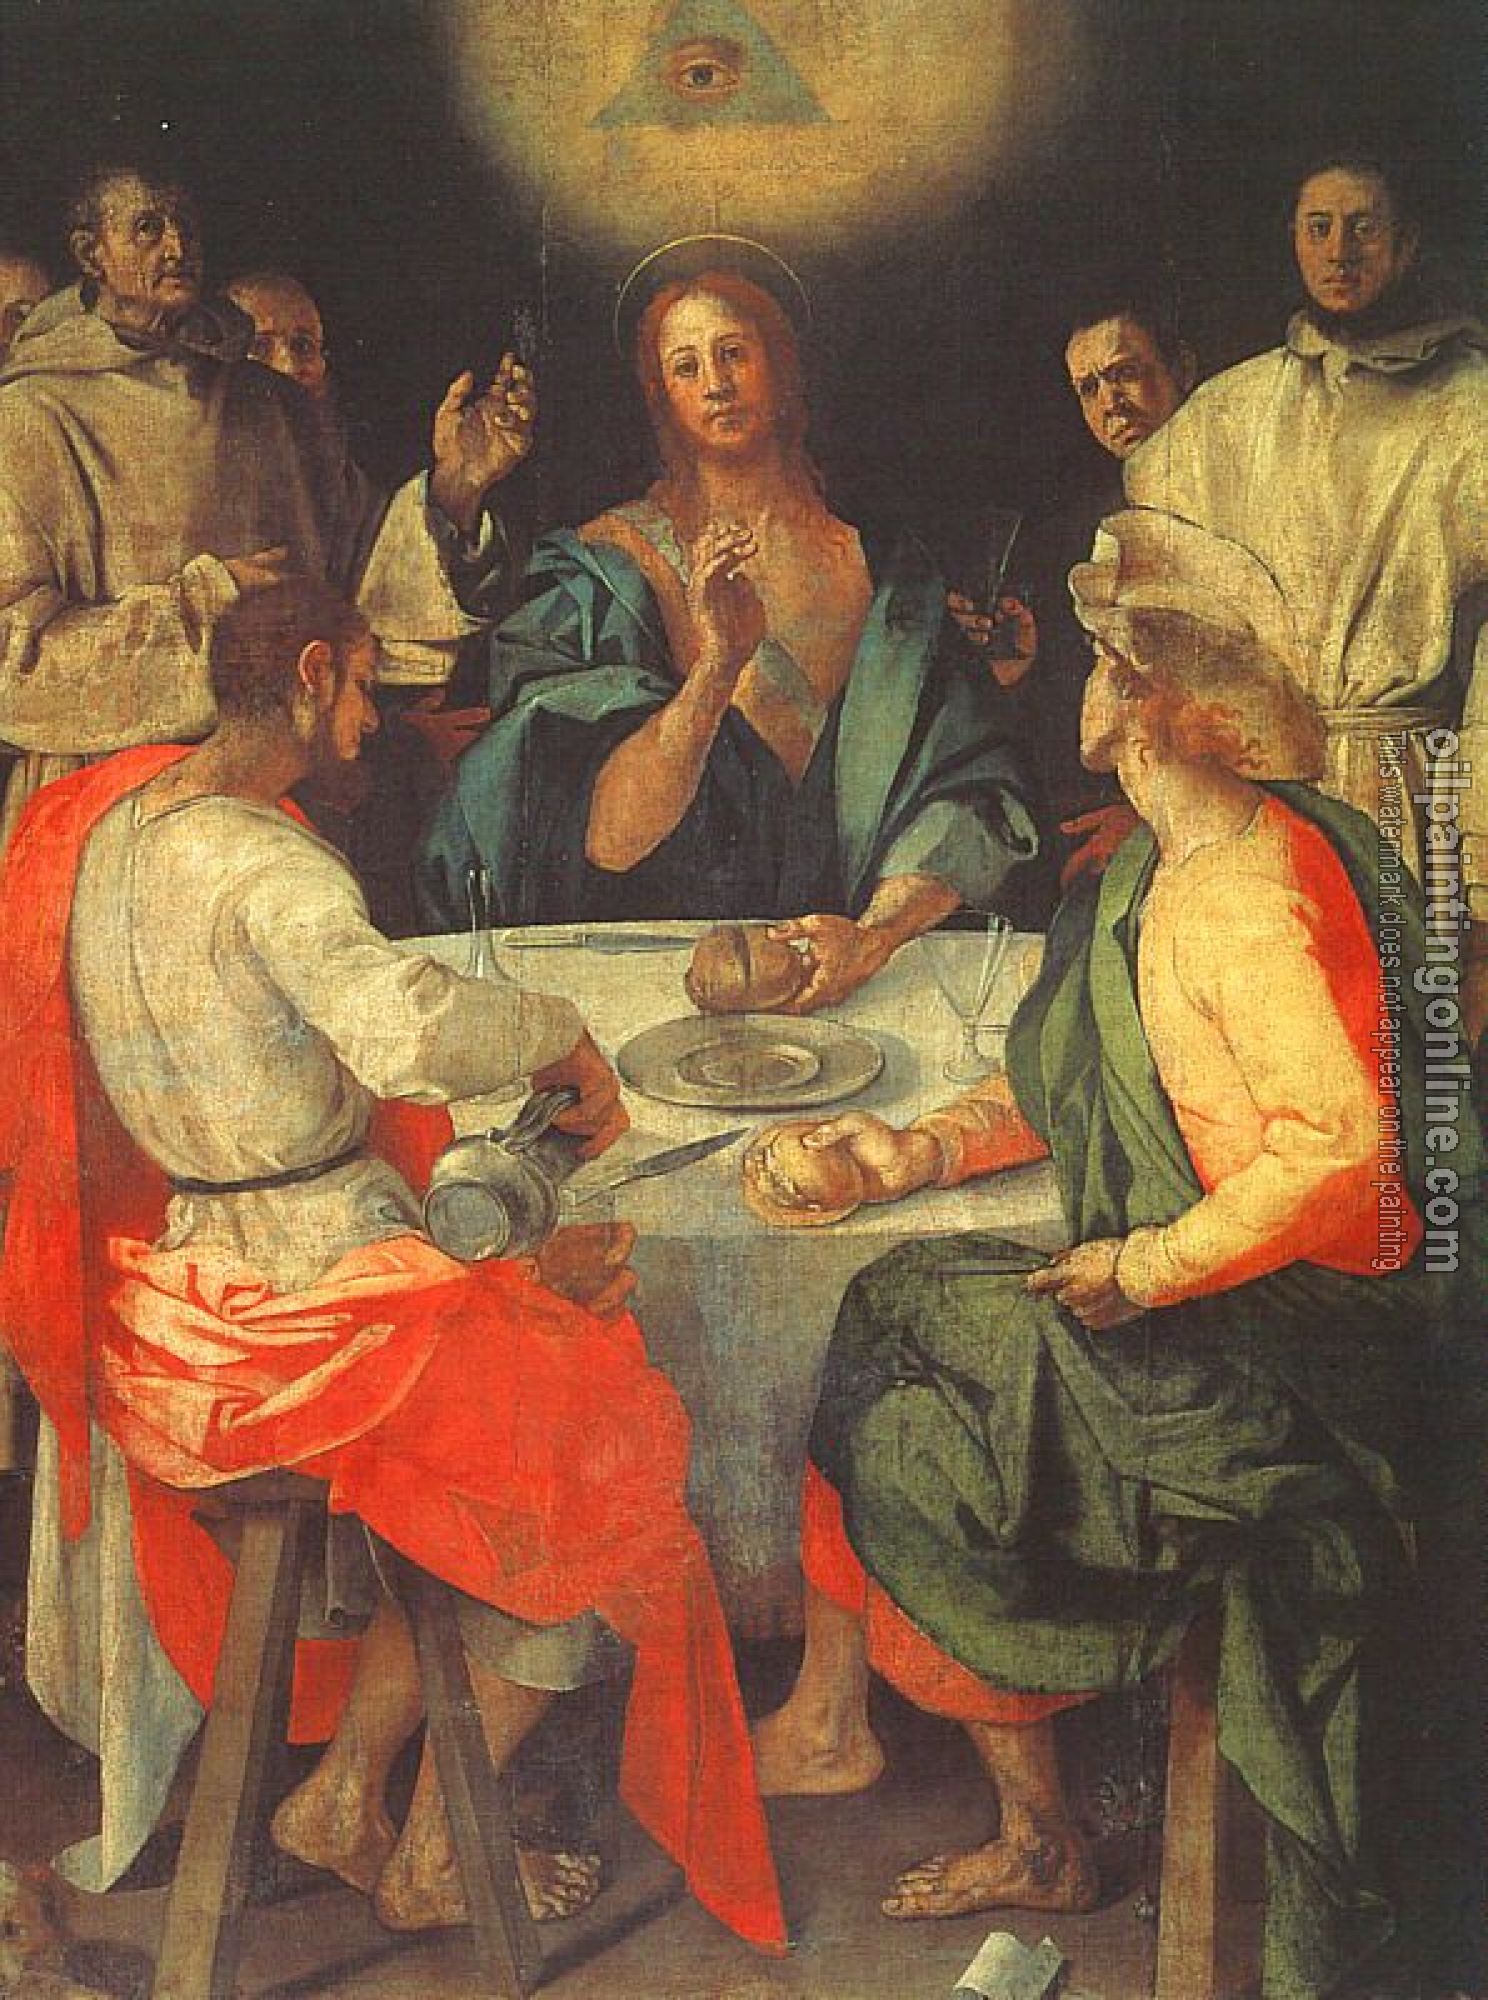 Pontormo, Jacopo da - The Meal in Emmaus